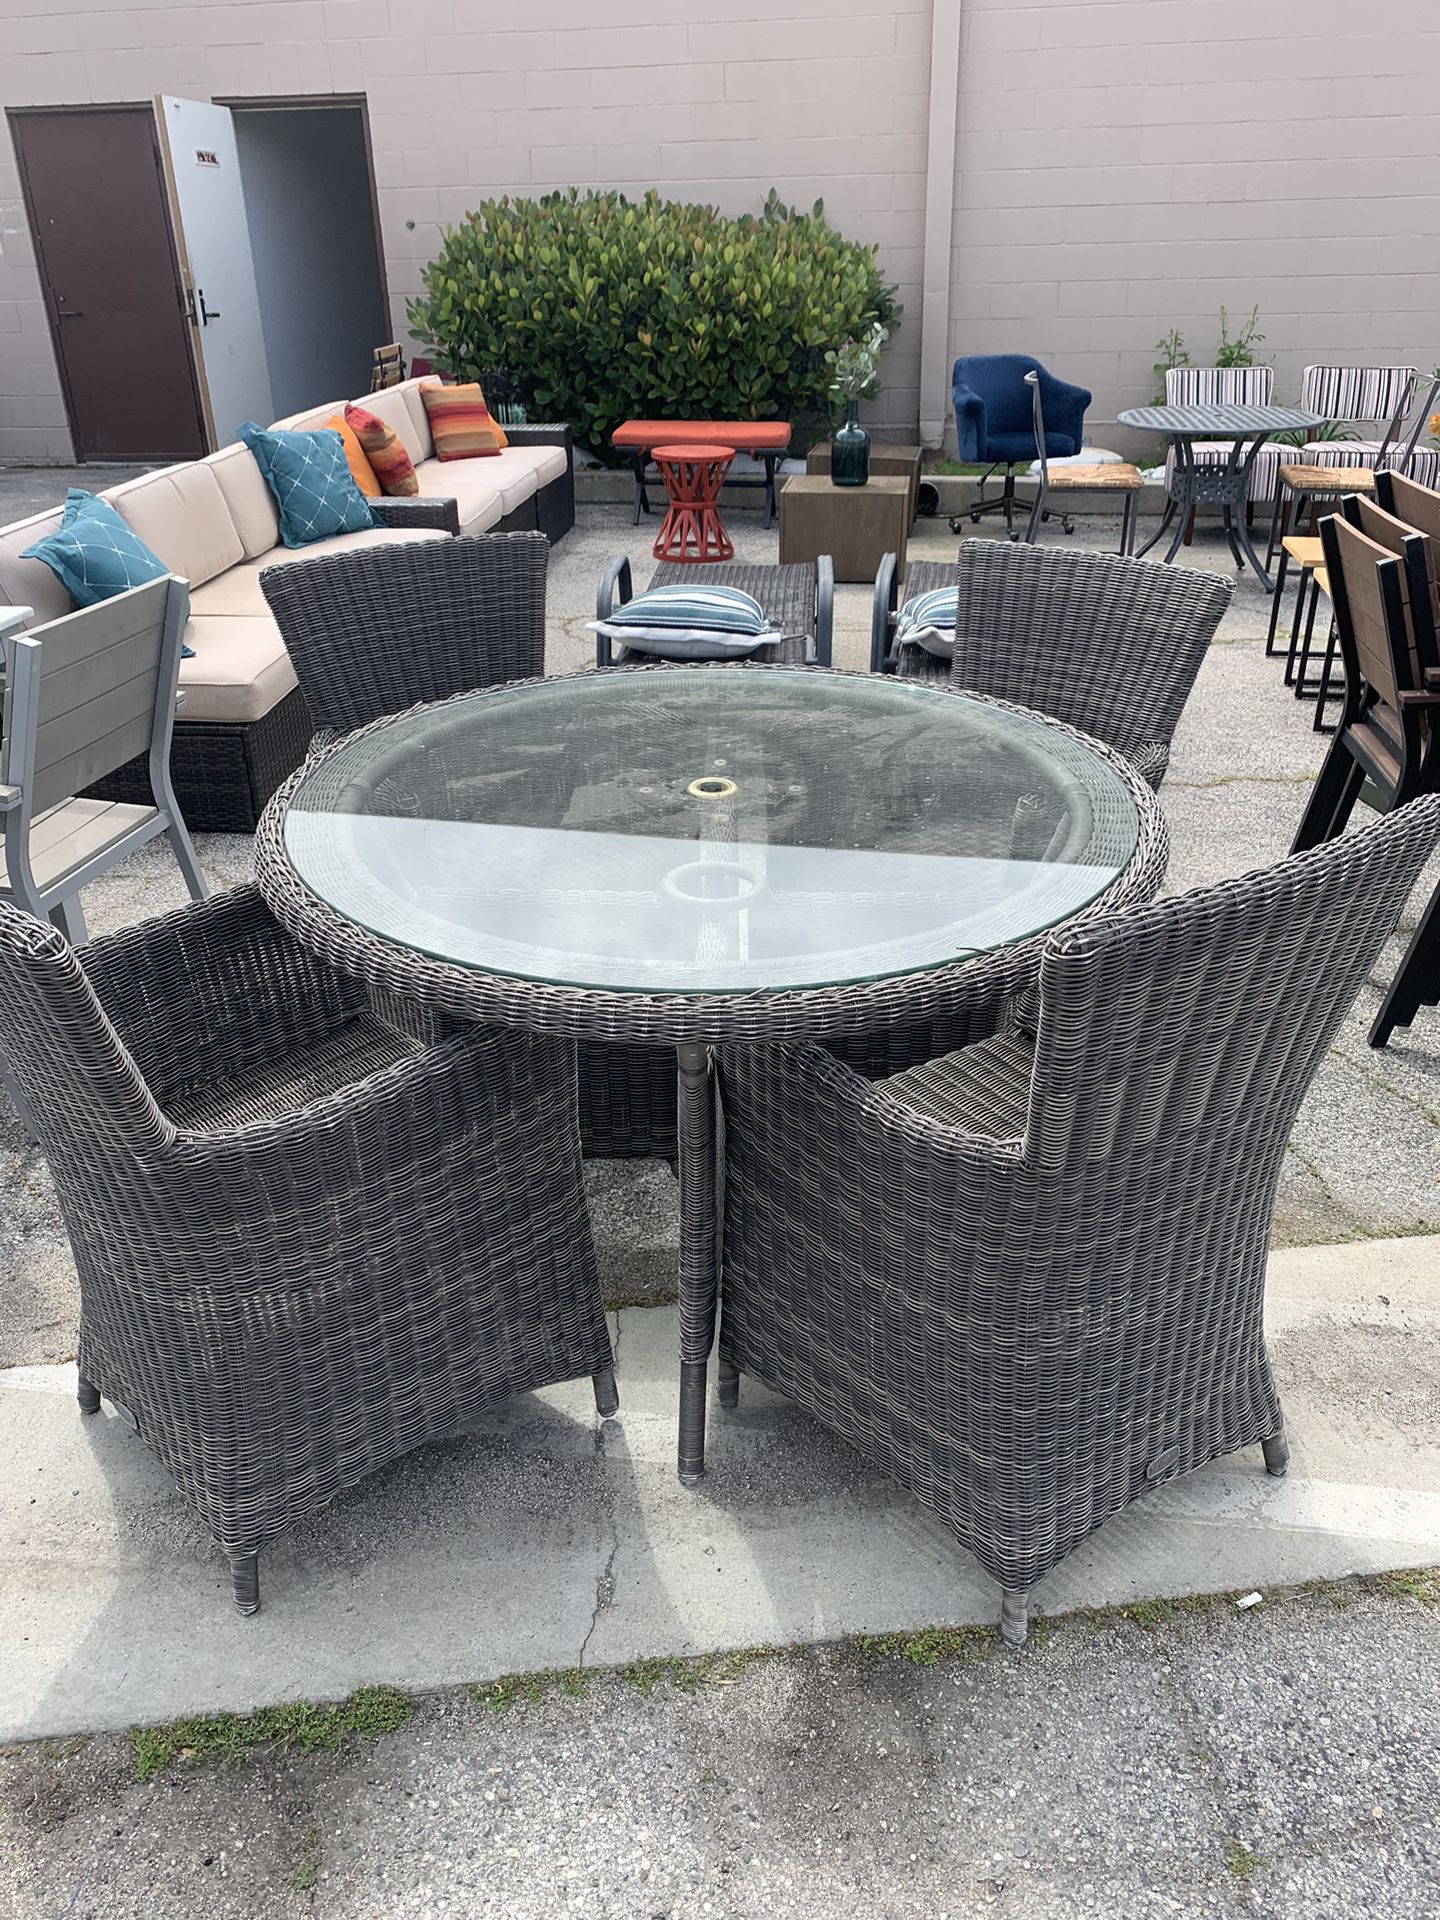 Outdoor Table Set 